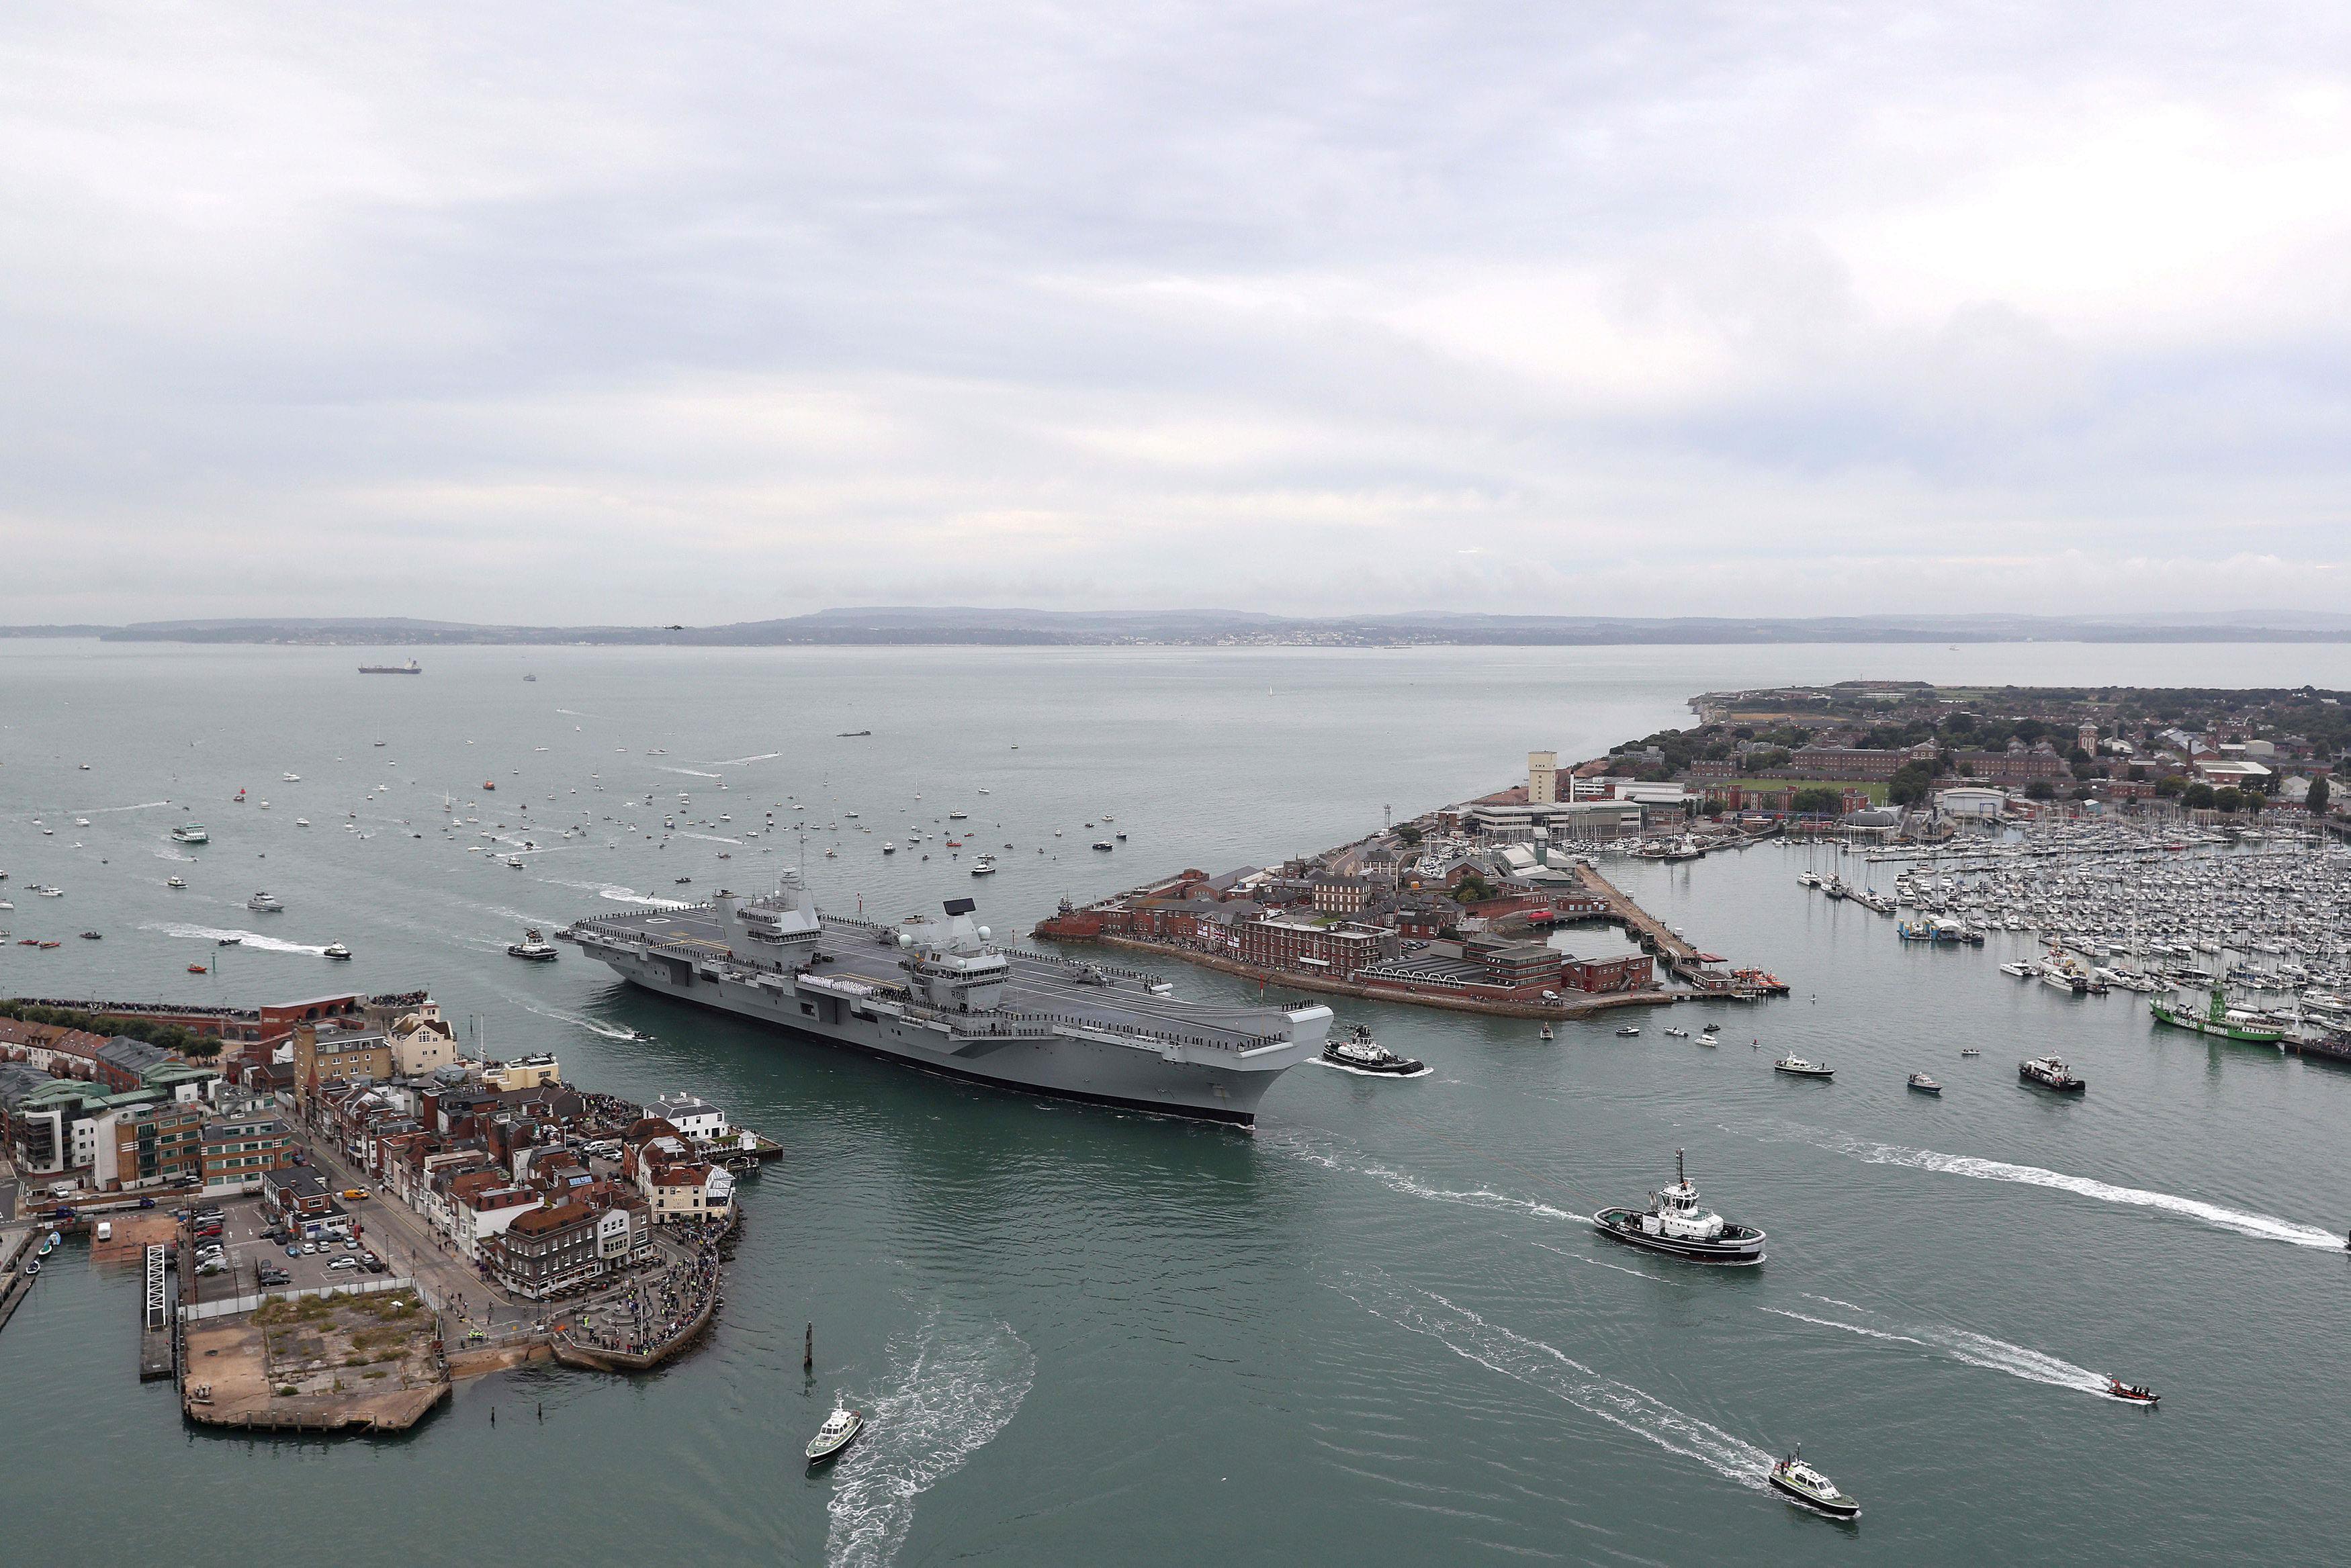 The Royal Navy's new aircraft carrier, HMS Queen Elizabeth, arrives in Portsmouth